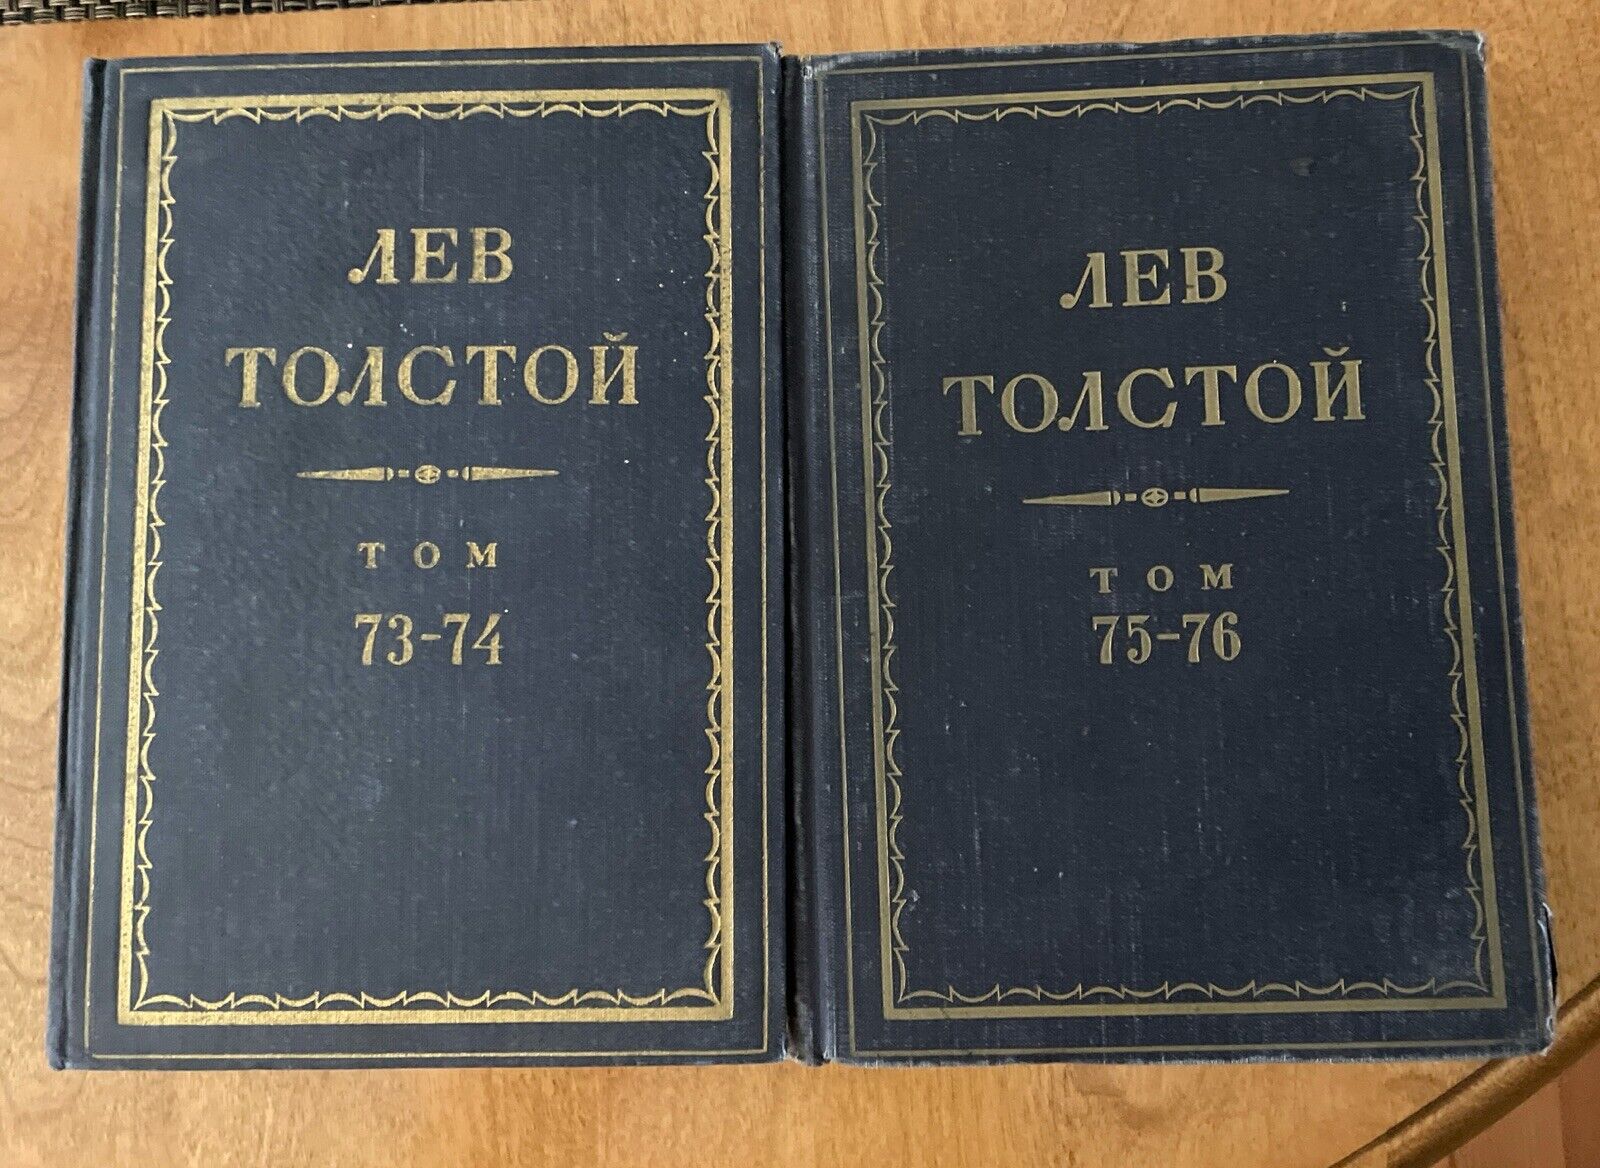 1954/56 Лев Толстой Complete Works of Lev Tolstoy V. 73-74 75-76 Russian Book